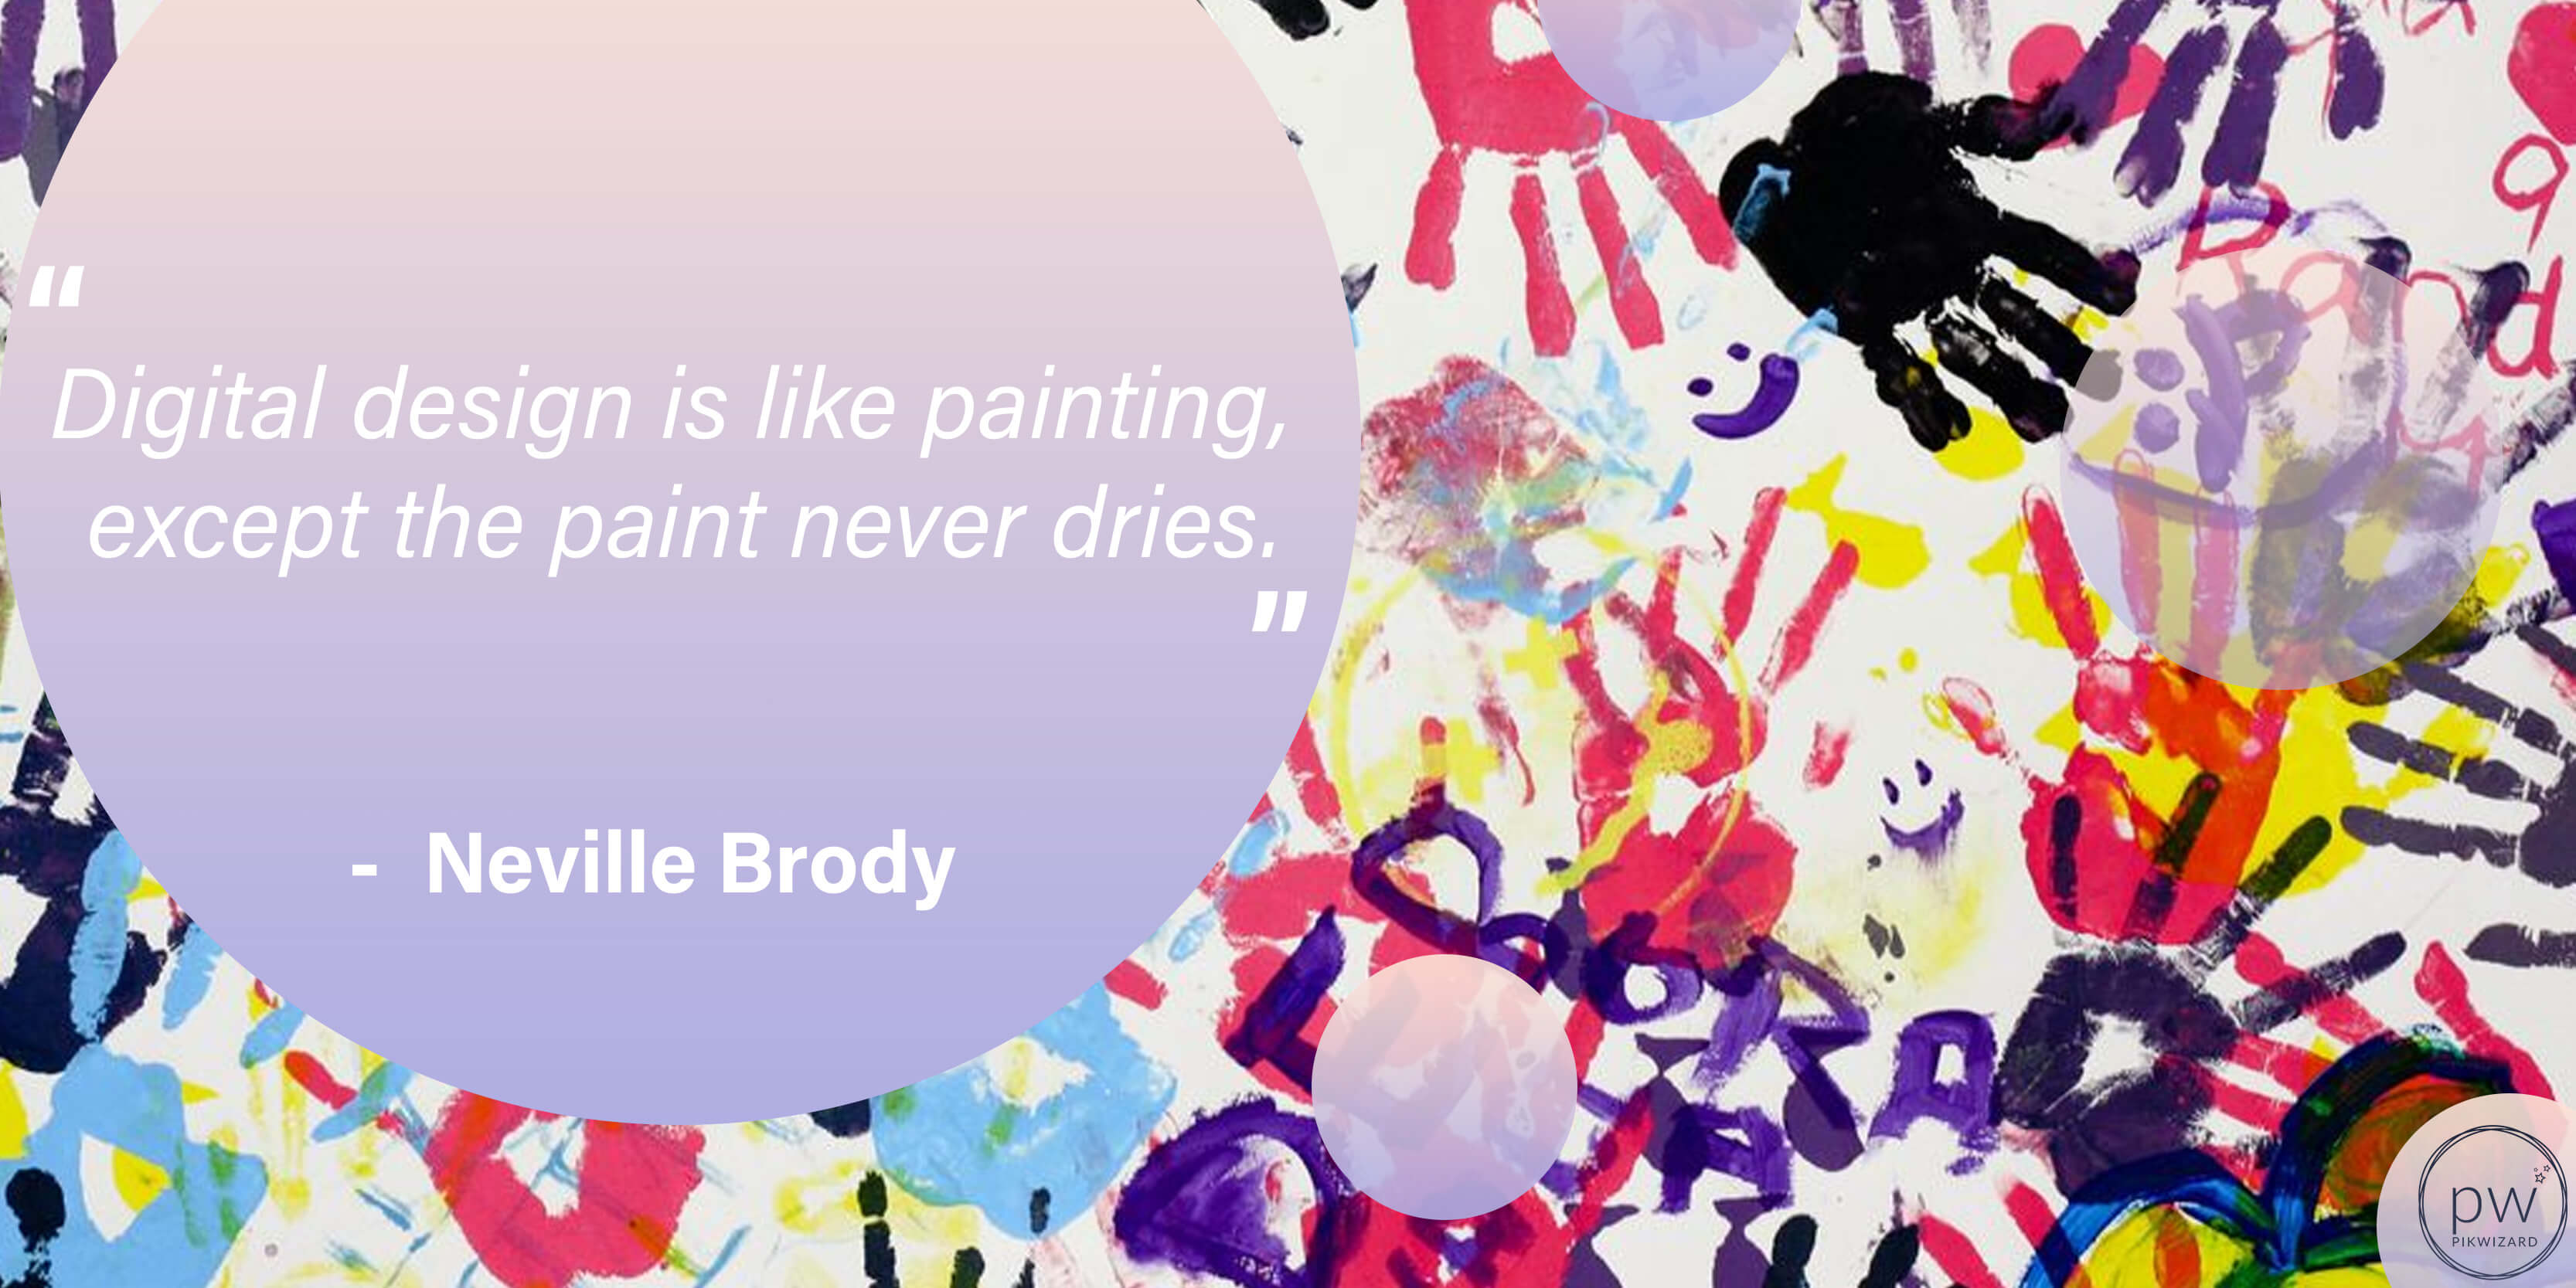 Neville Brody quote with an image of colourful handprints - Features of digital design - Image